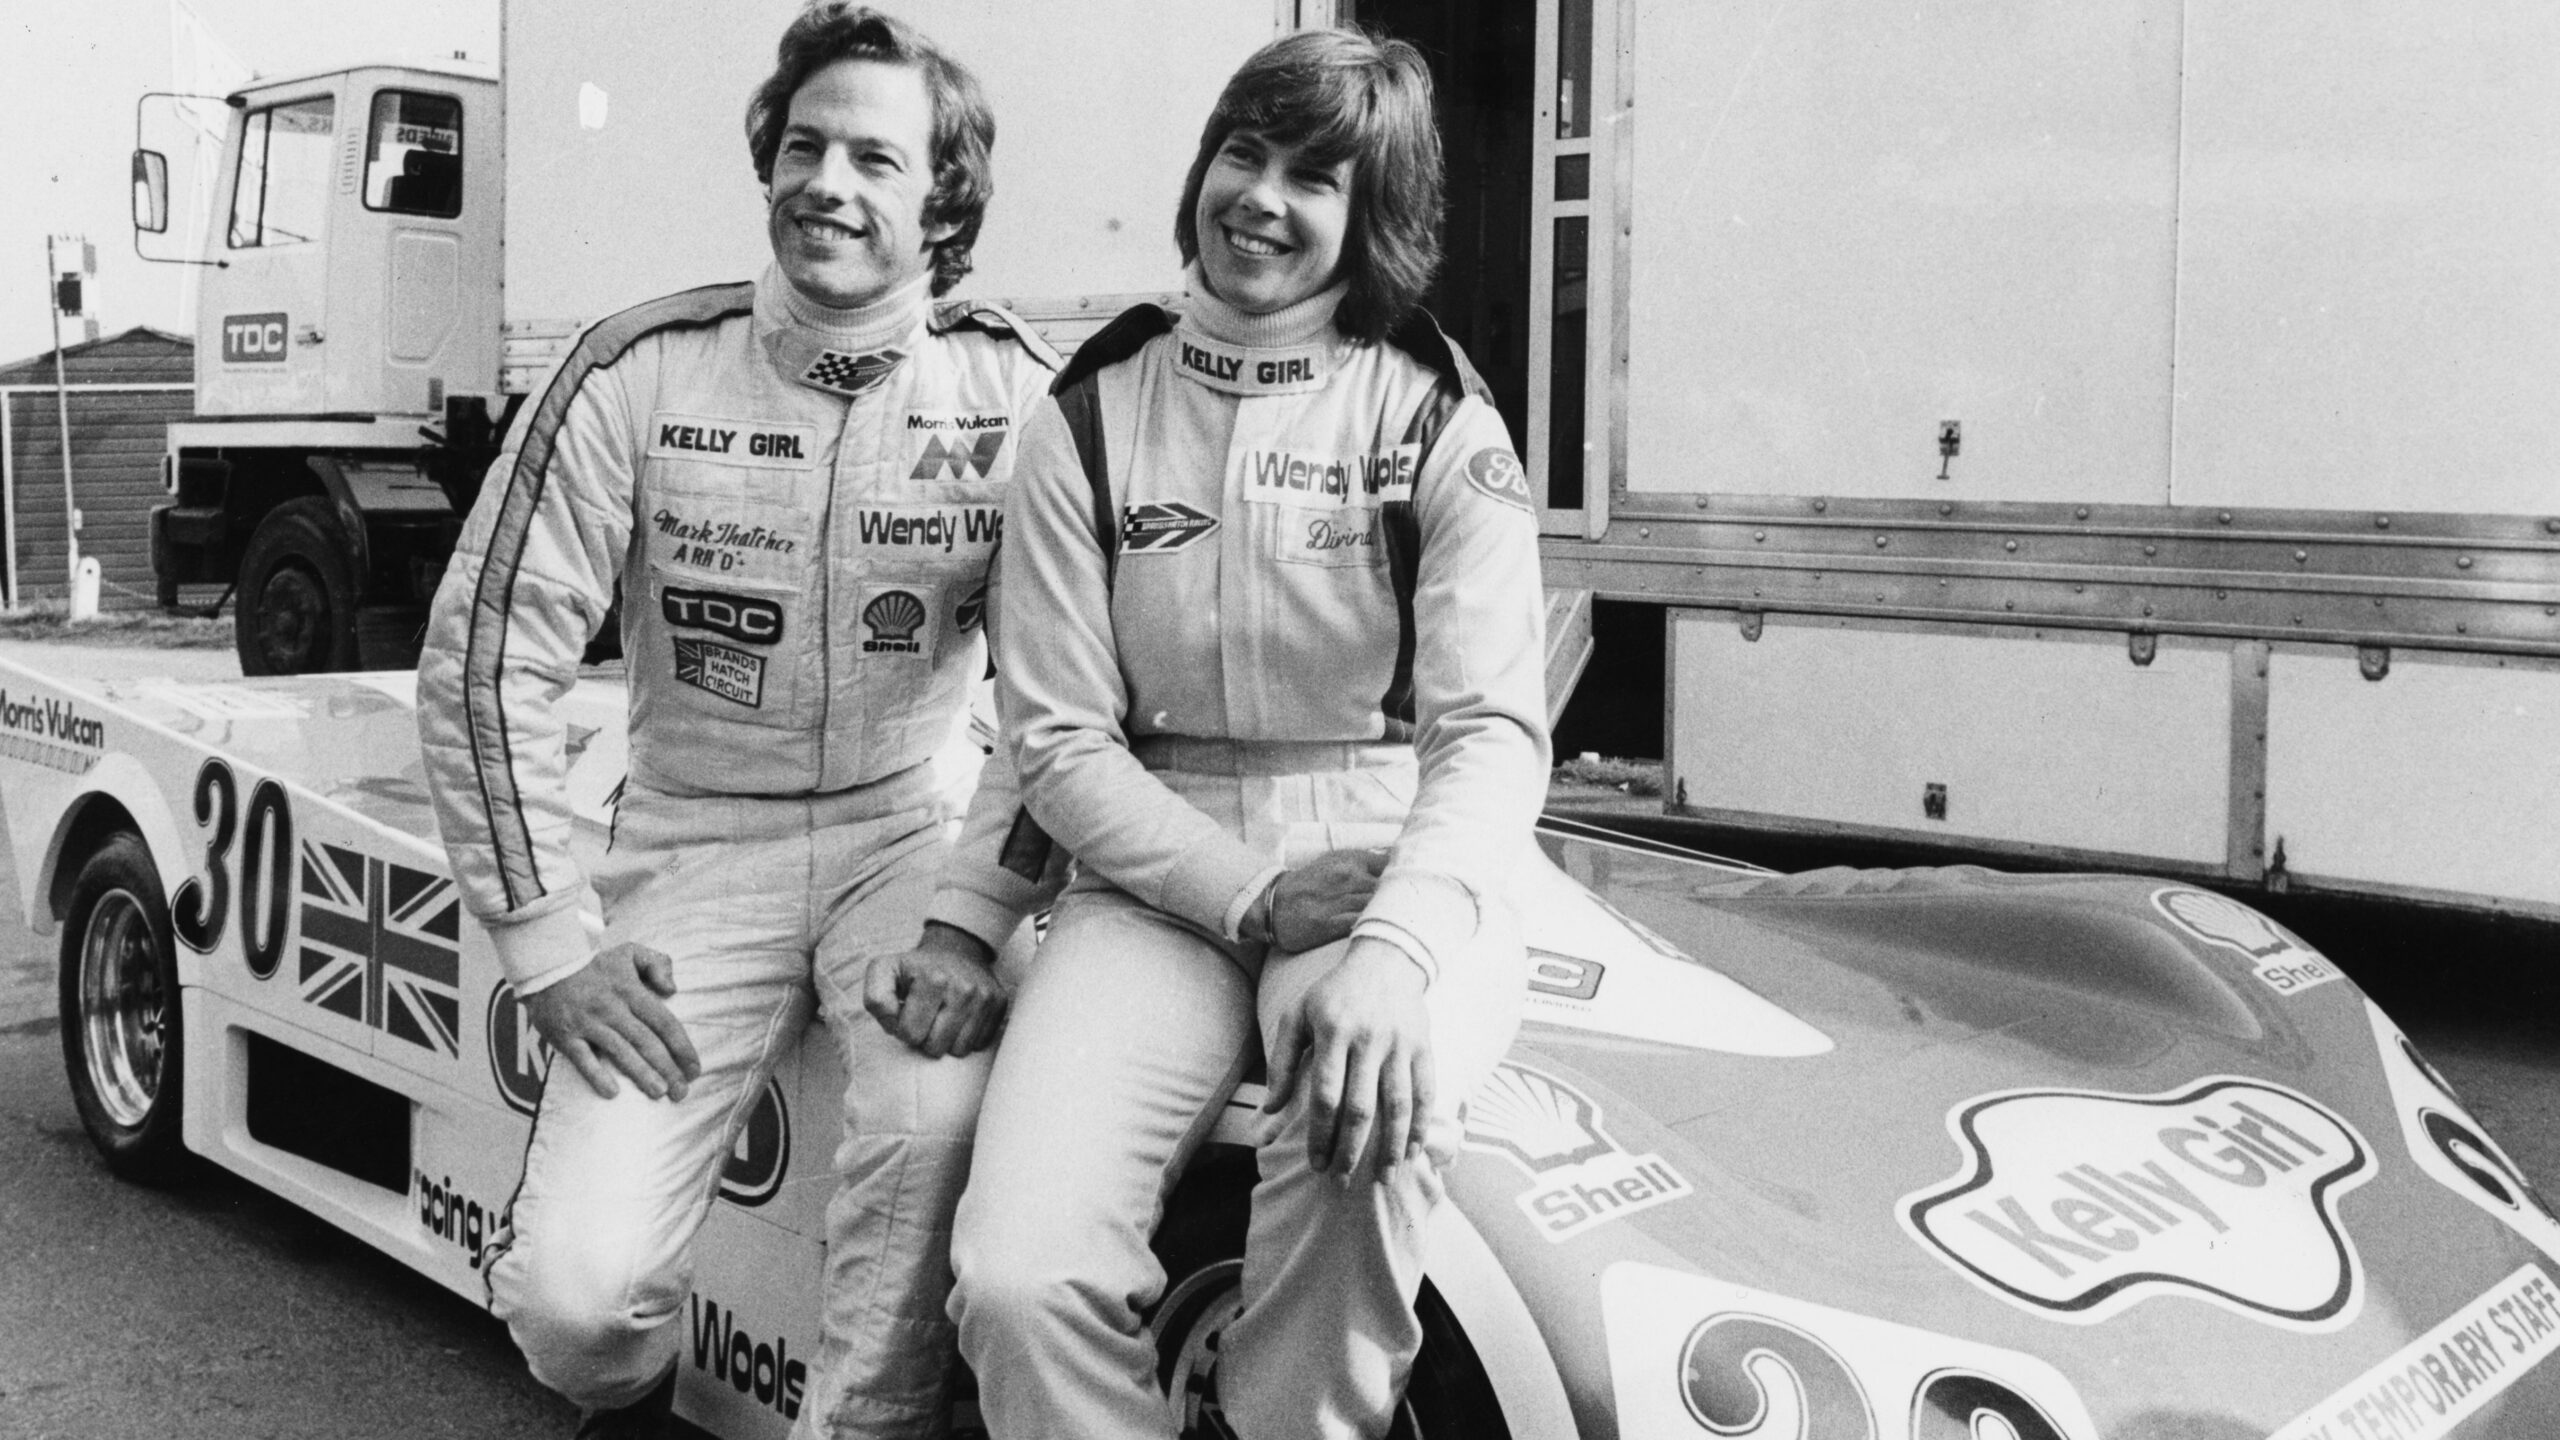 Racing drivers Davina Galica and Mark Thatcher, son of British Prime Minister Margaret Thatcher, sitting on the bonnet of a new car prior to competing in the World Championship race at Brands Hatch, England, February 29th 1980. 